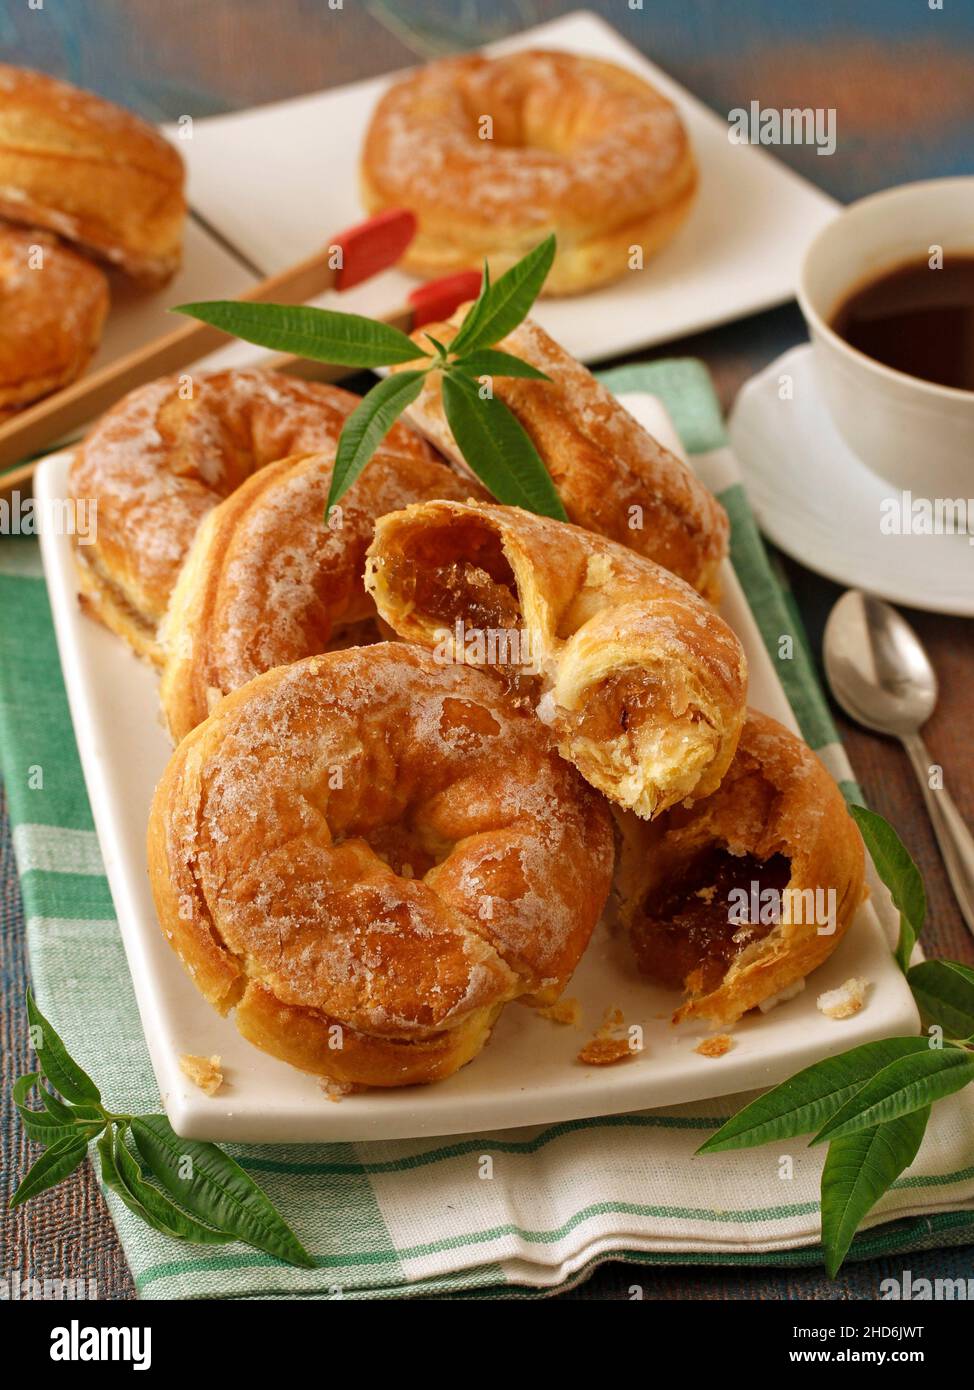 Puff pastry donuts stuffed with pumpkin jam. Stock Photo